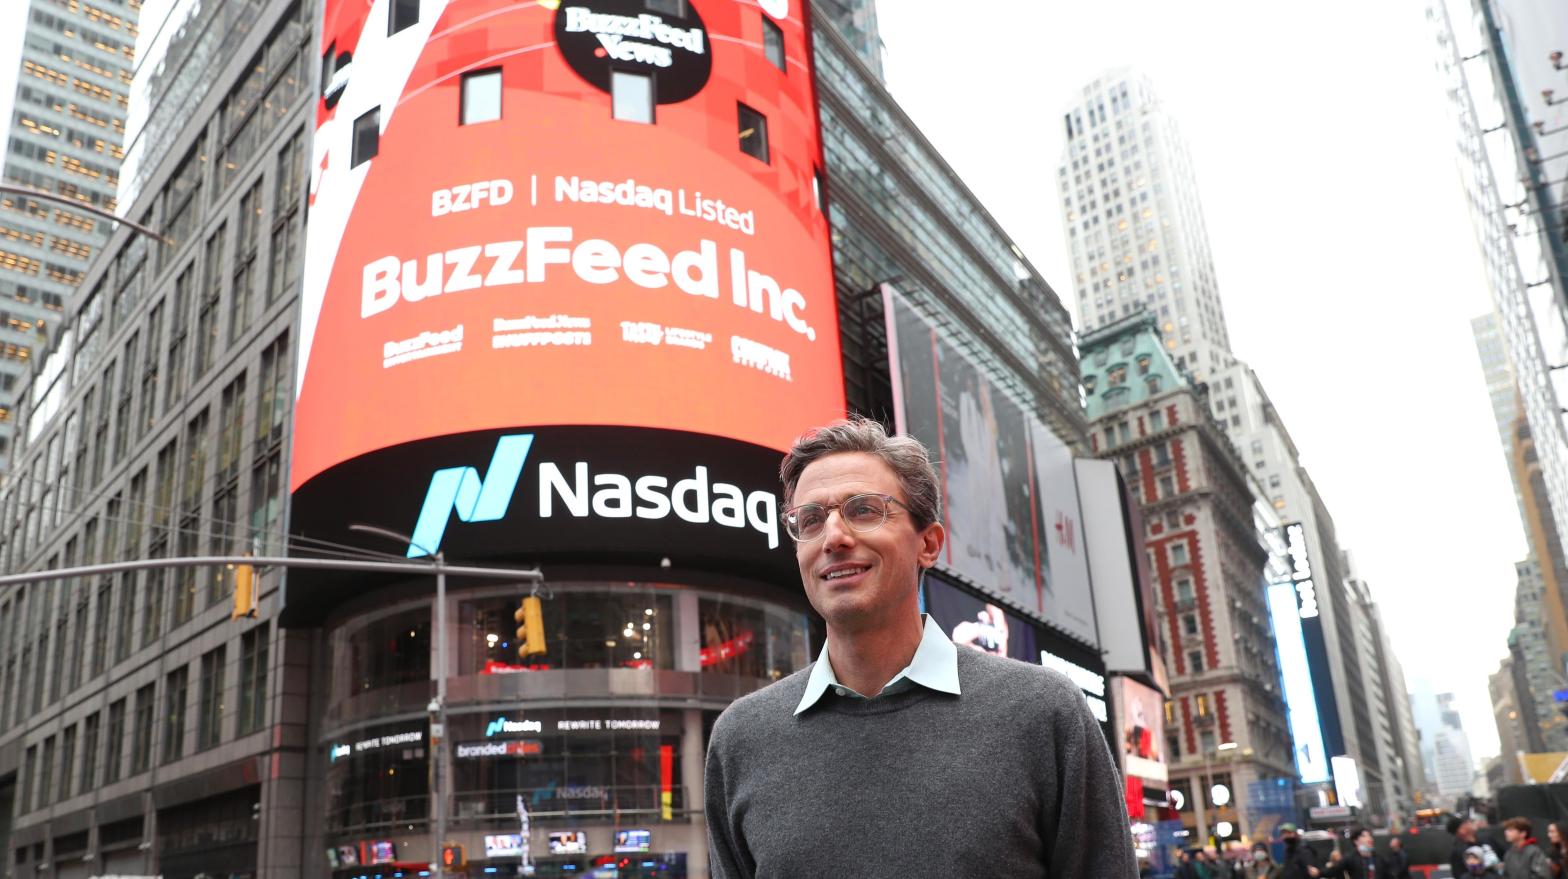 BuzzFeed CEO Jonah Peretti has been bullish on AI tech and has pushed integrating it onto the website.  (Photo: Bennett Raglin, Getty Images)